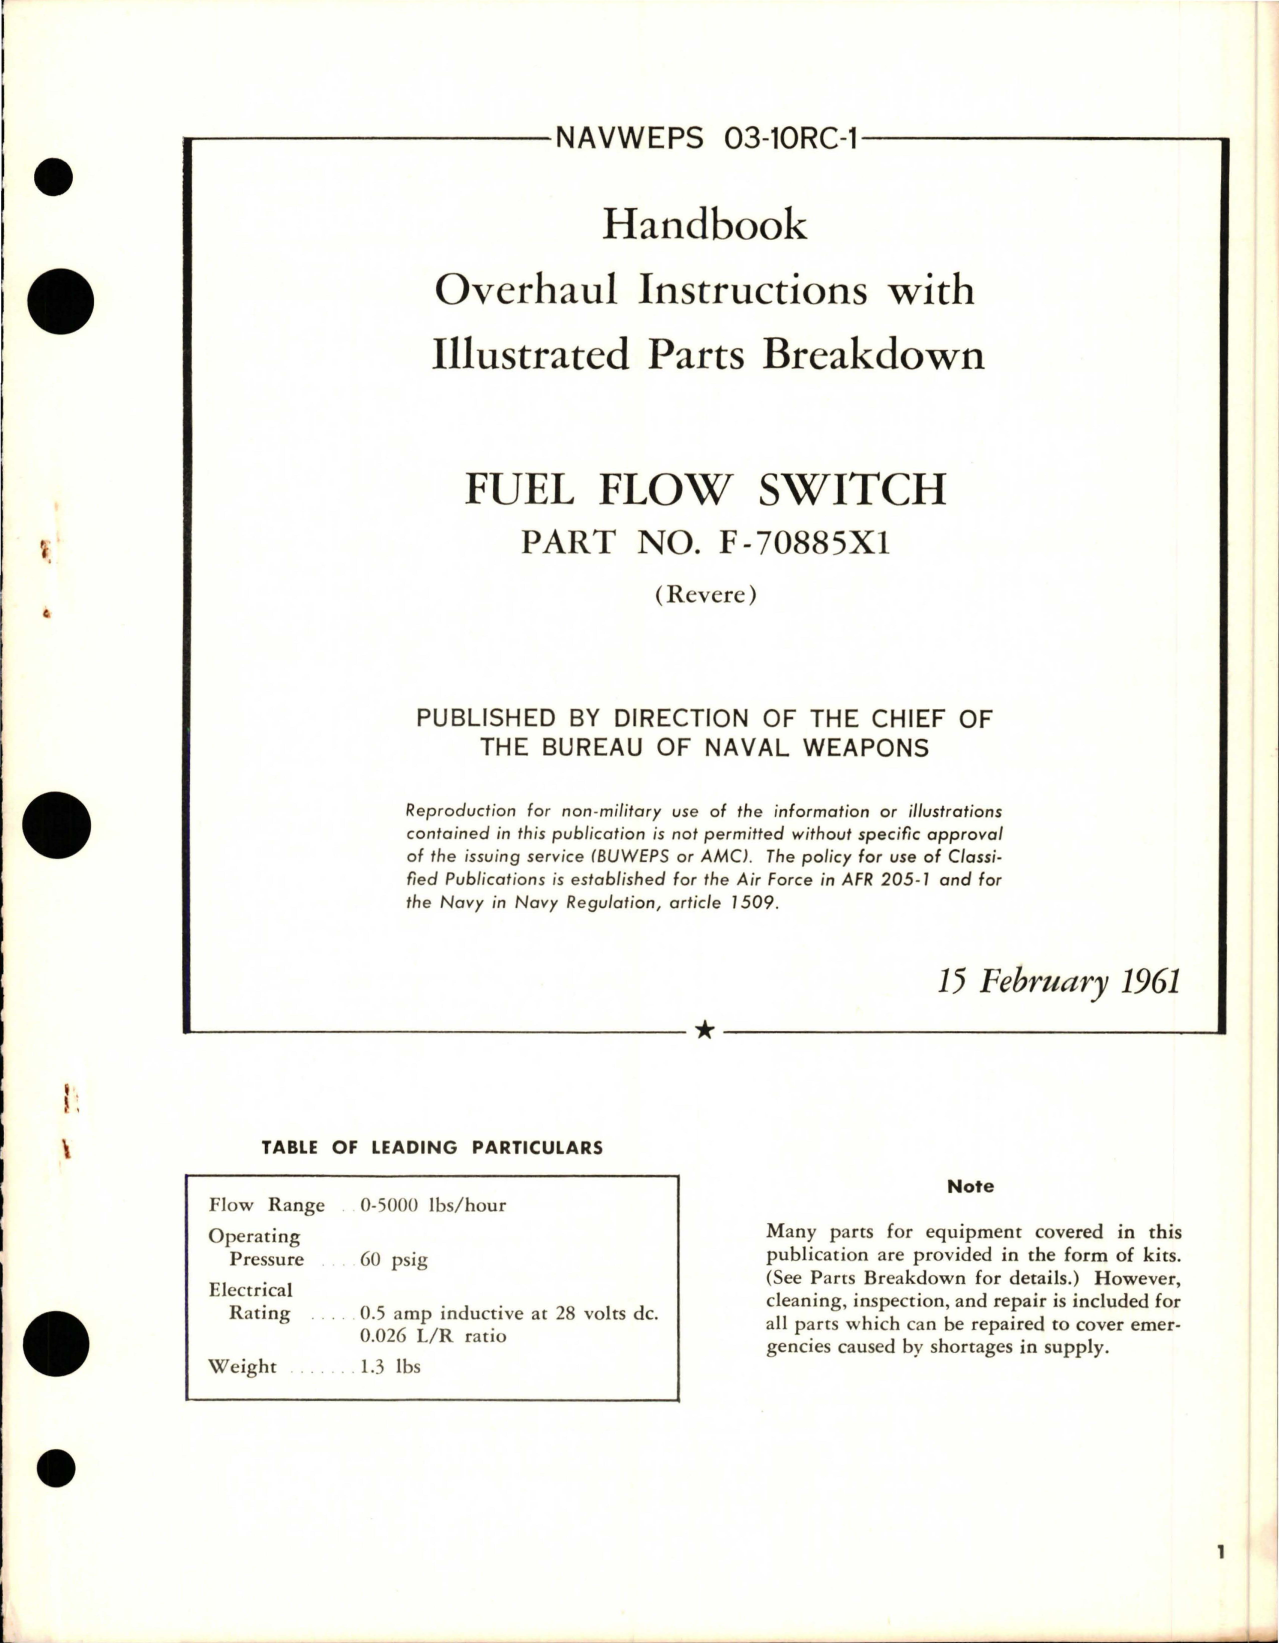 Sample page 1 from AirCorps Library document: Overhaul Instructions with Illustrated Parts Breakdown for Fuel Flow Switch - Part F-70885X1